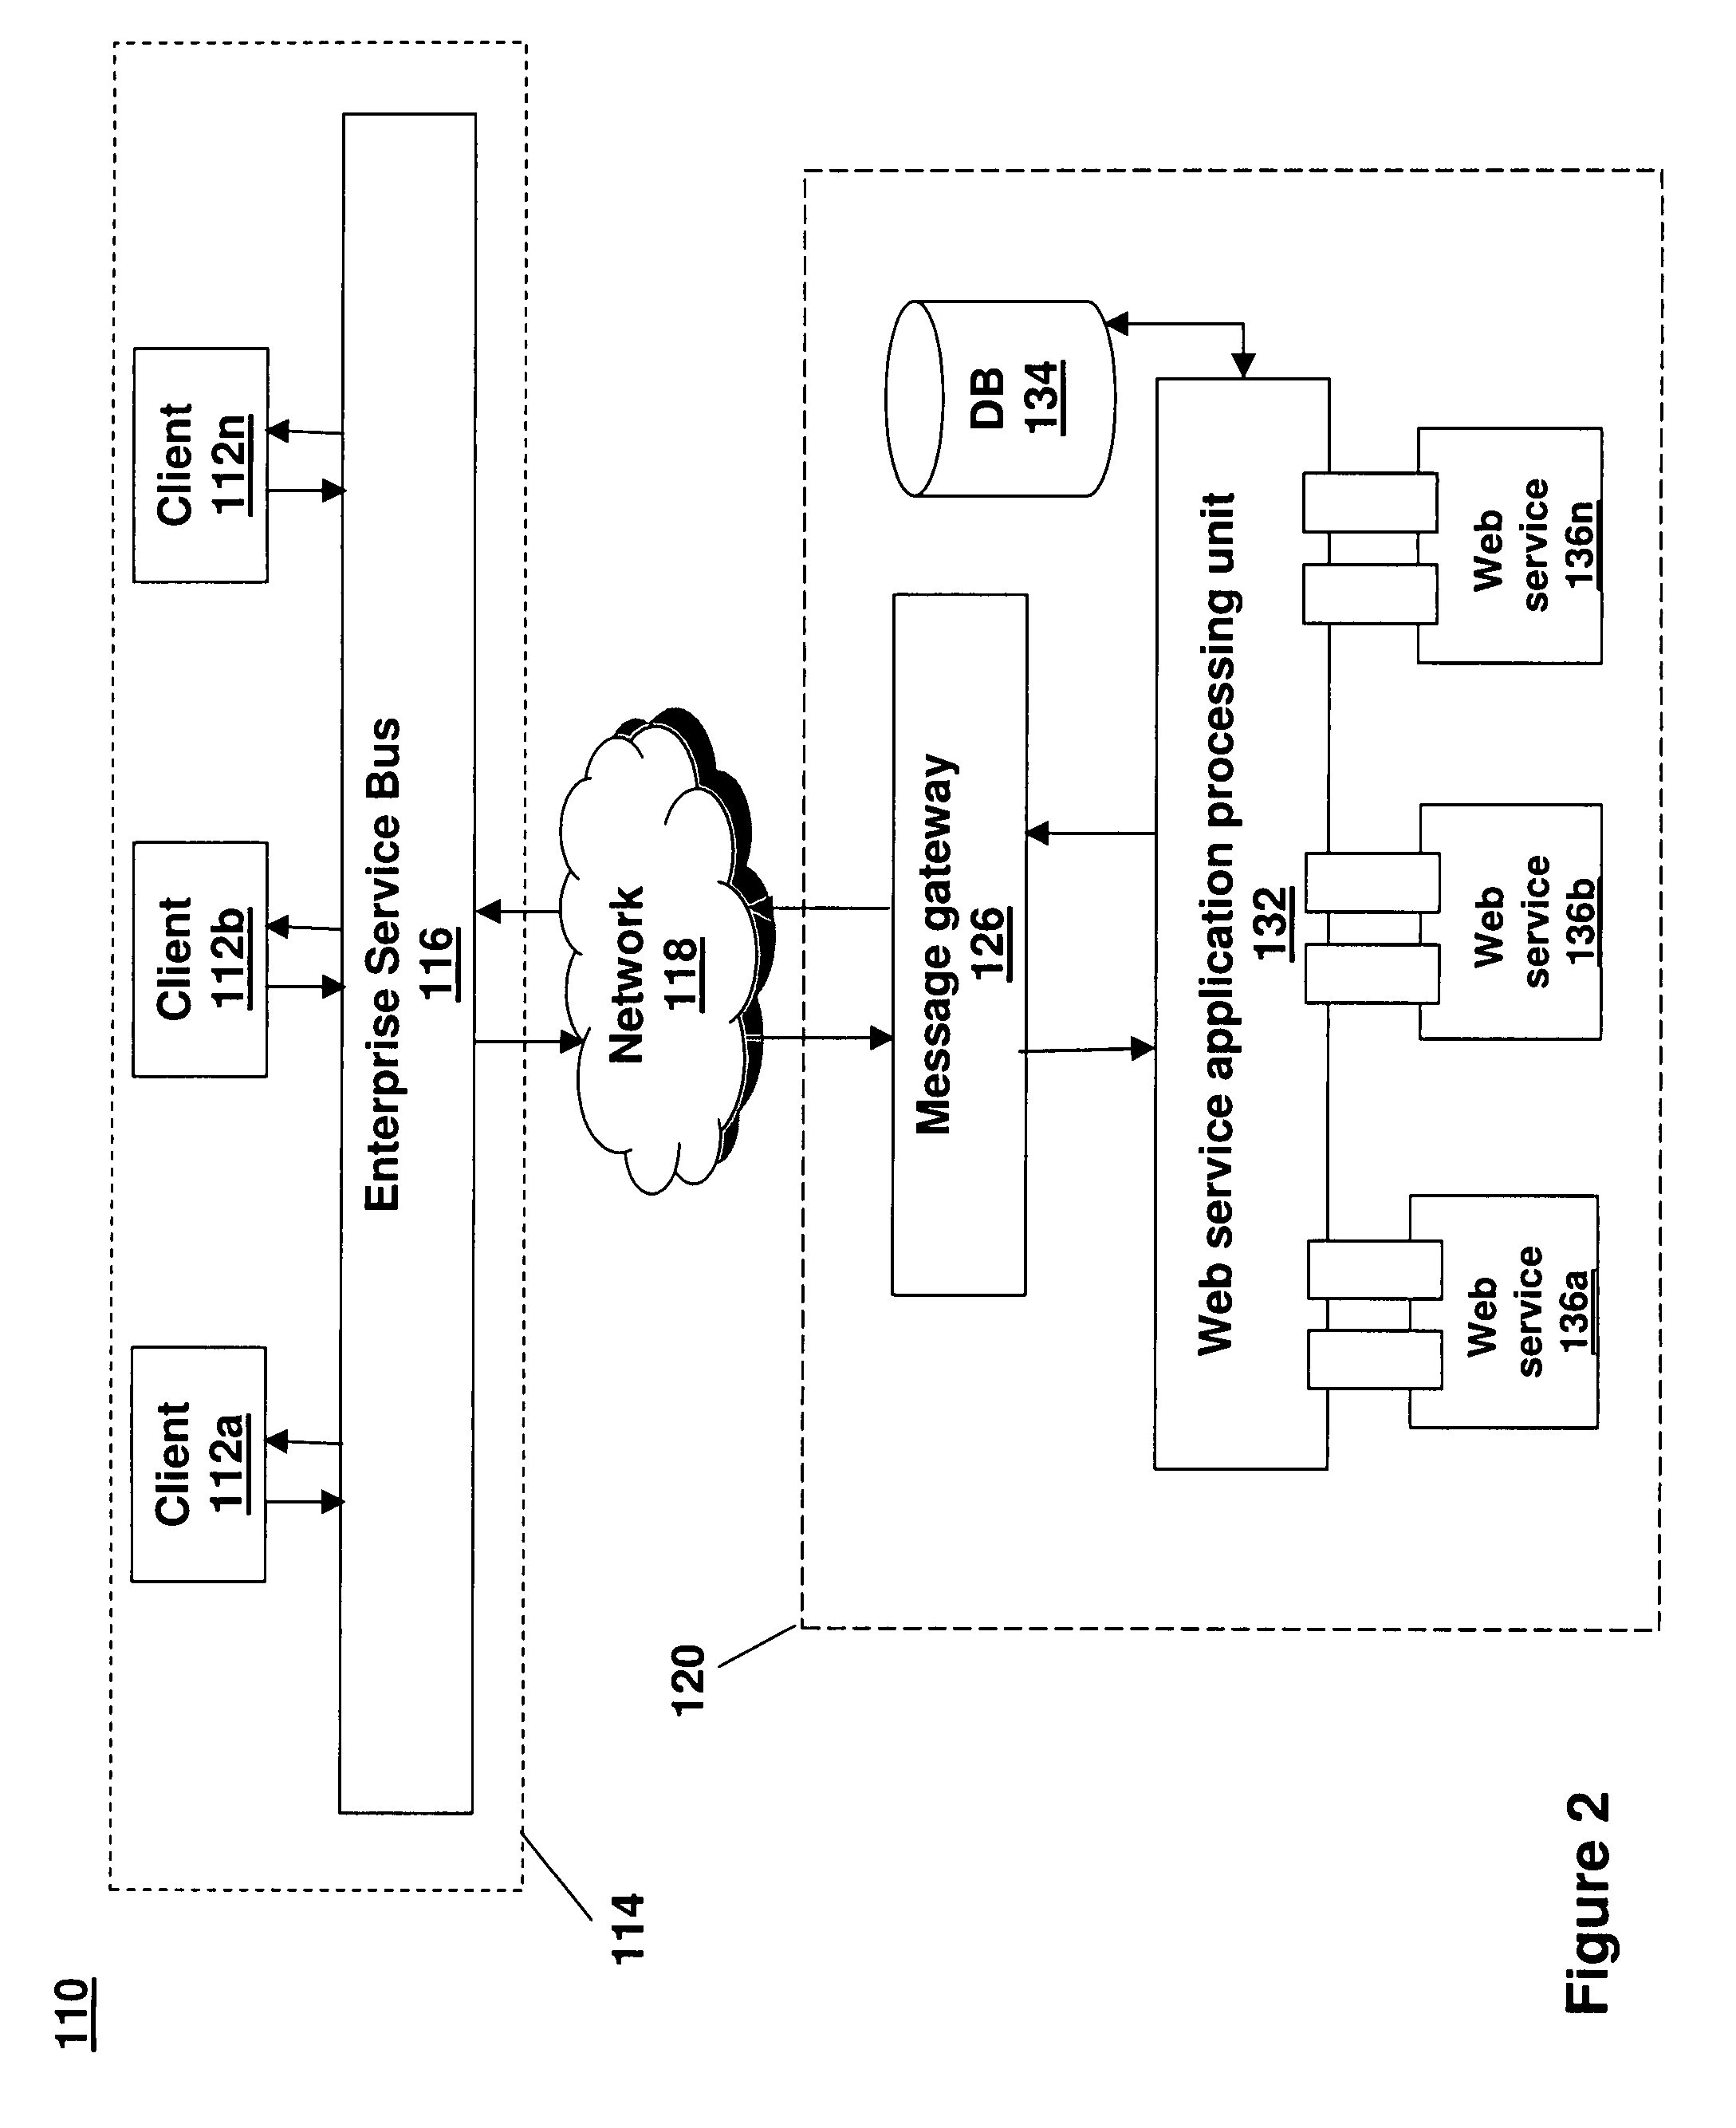 System and product for role-based tag management for collaborative services integrated within an soa